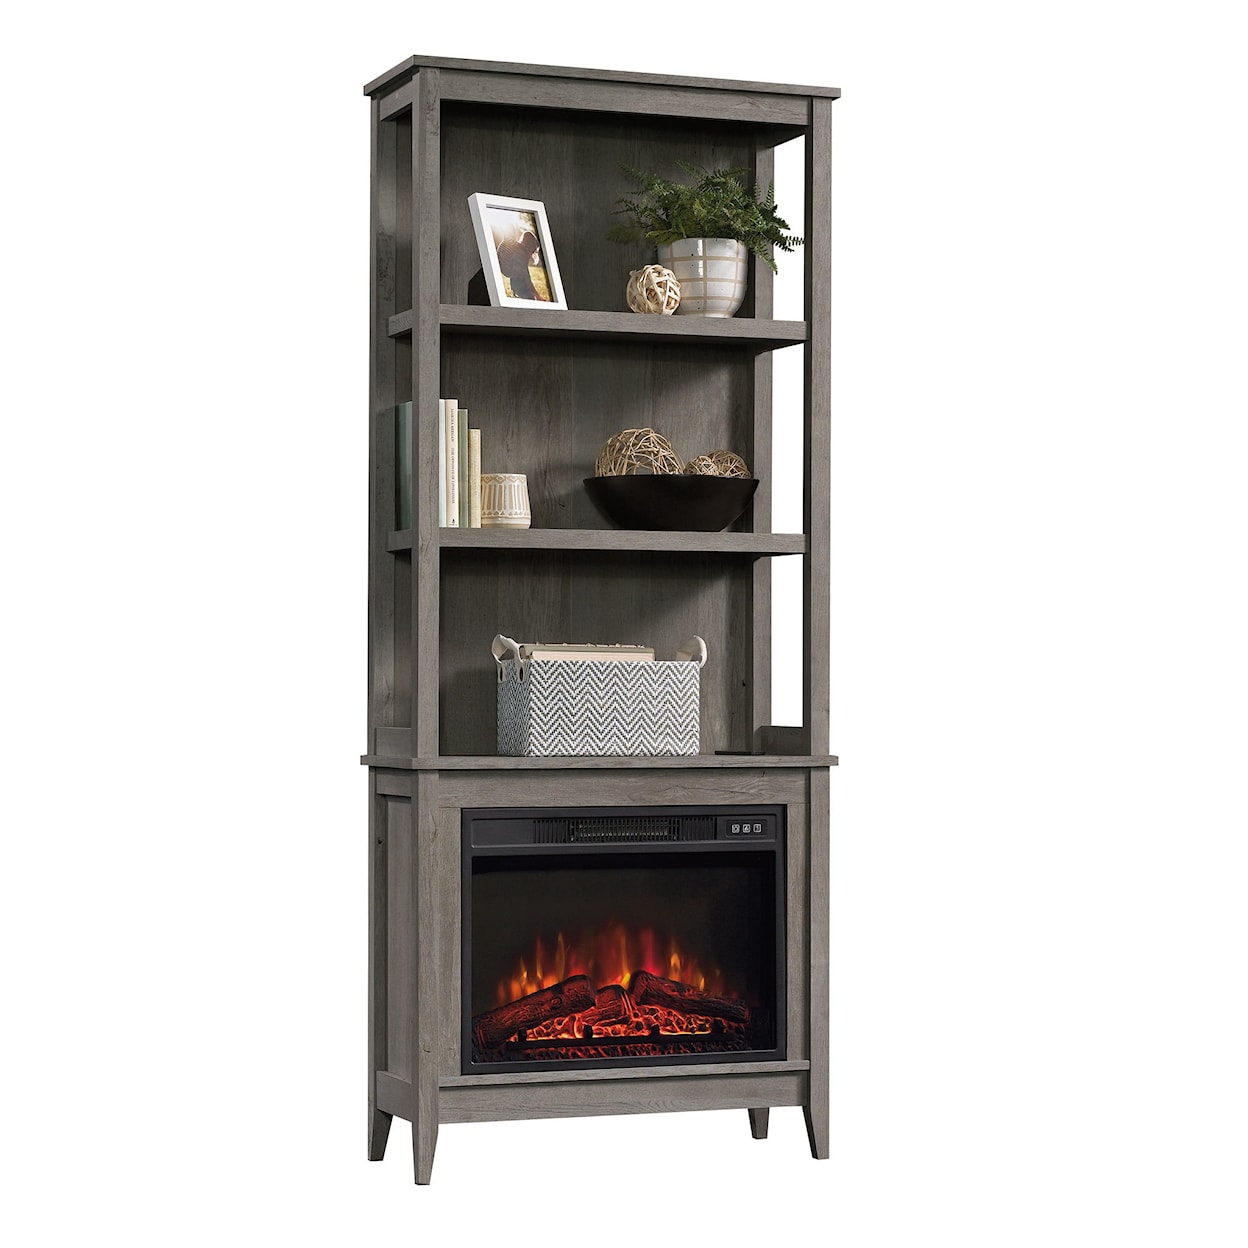 Sauder Miscellaneous Storage Bookcase with Fireplace